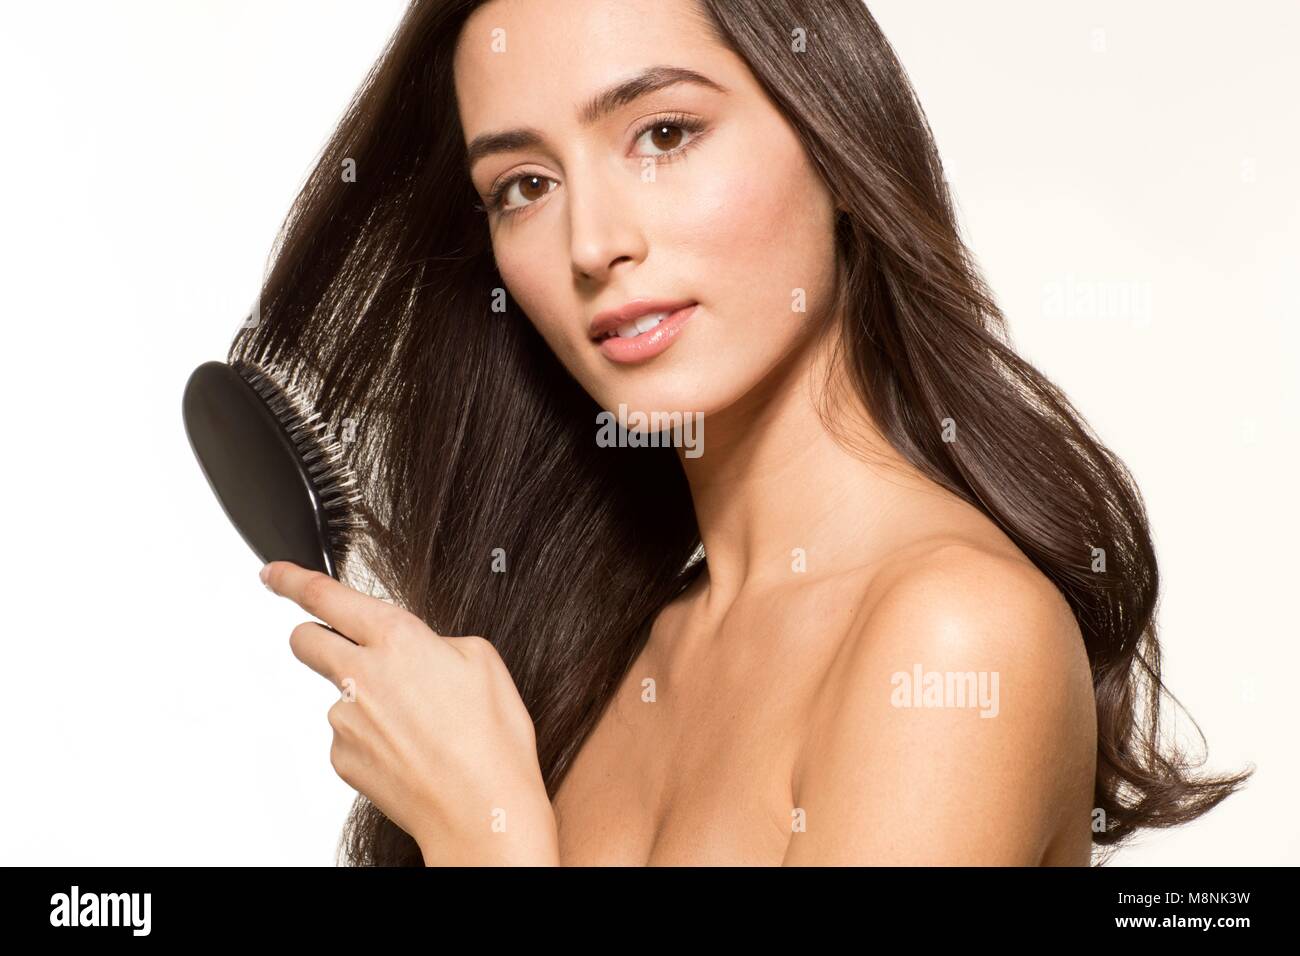 MODEL RELEASED. Young woman brushing long brown hair, portrait. Stock Photo